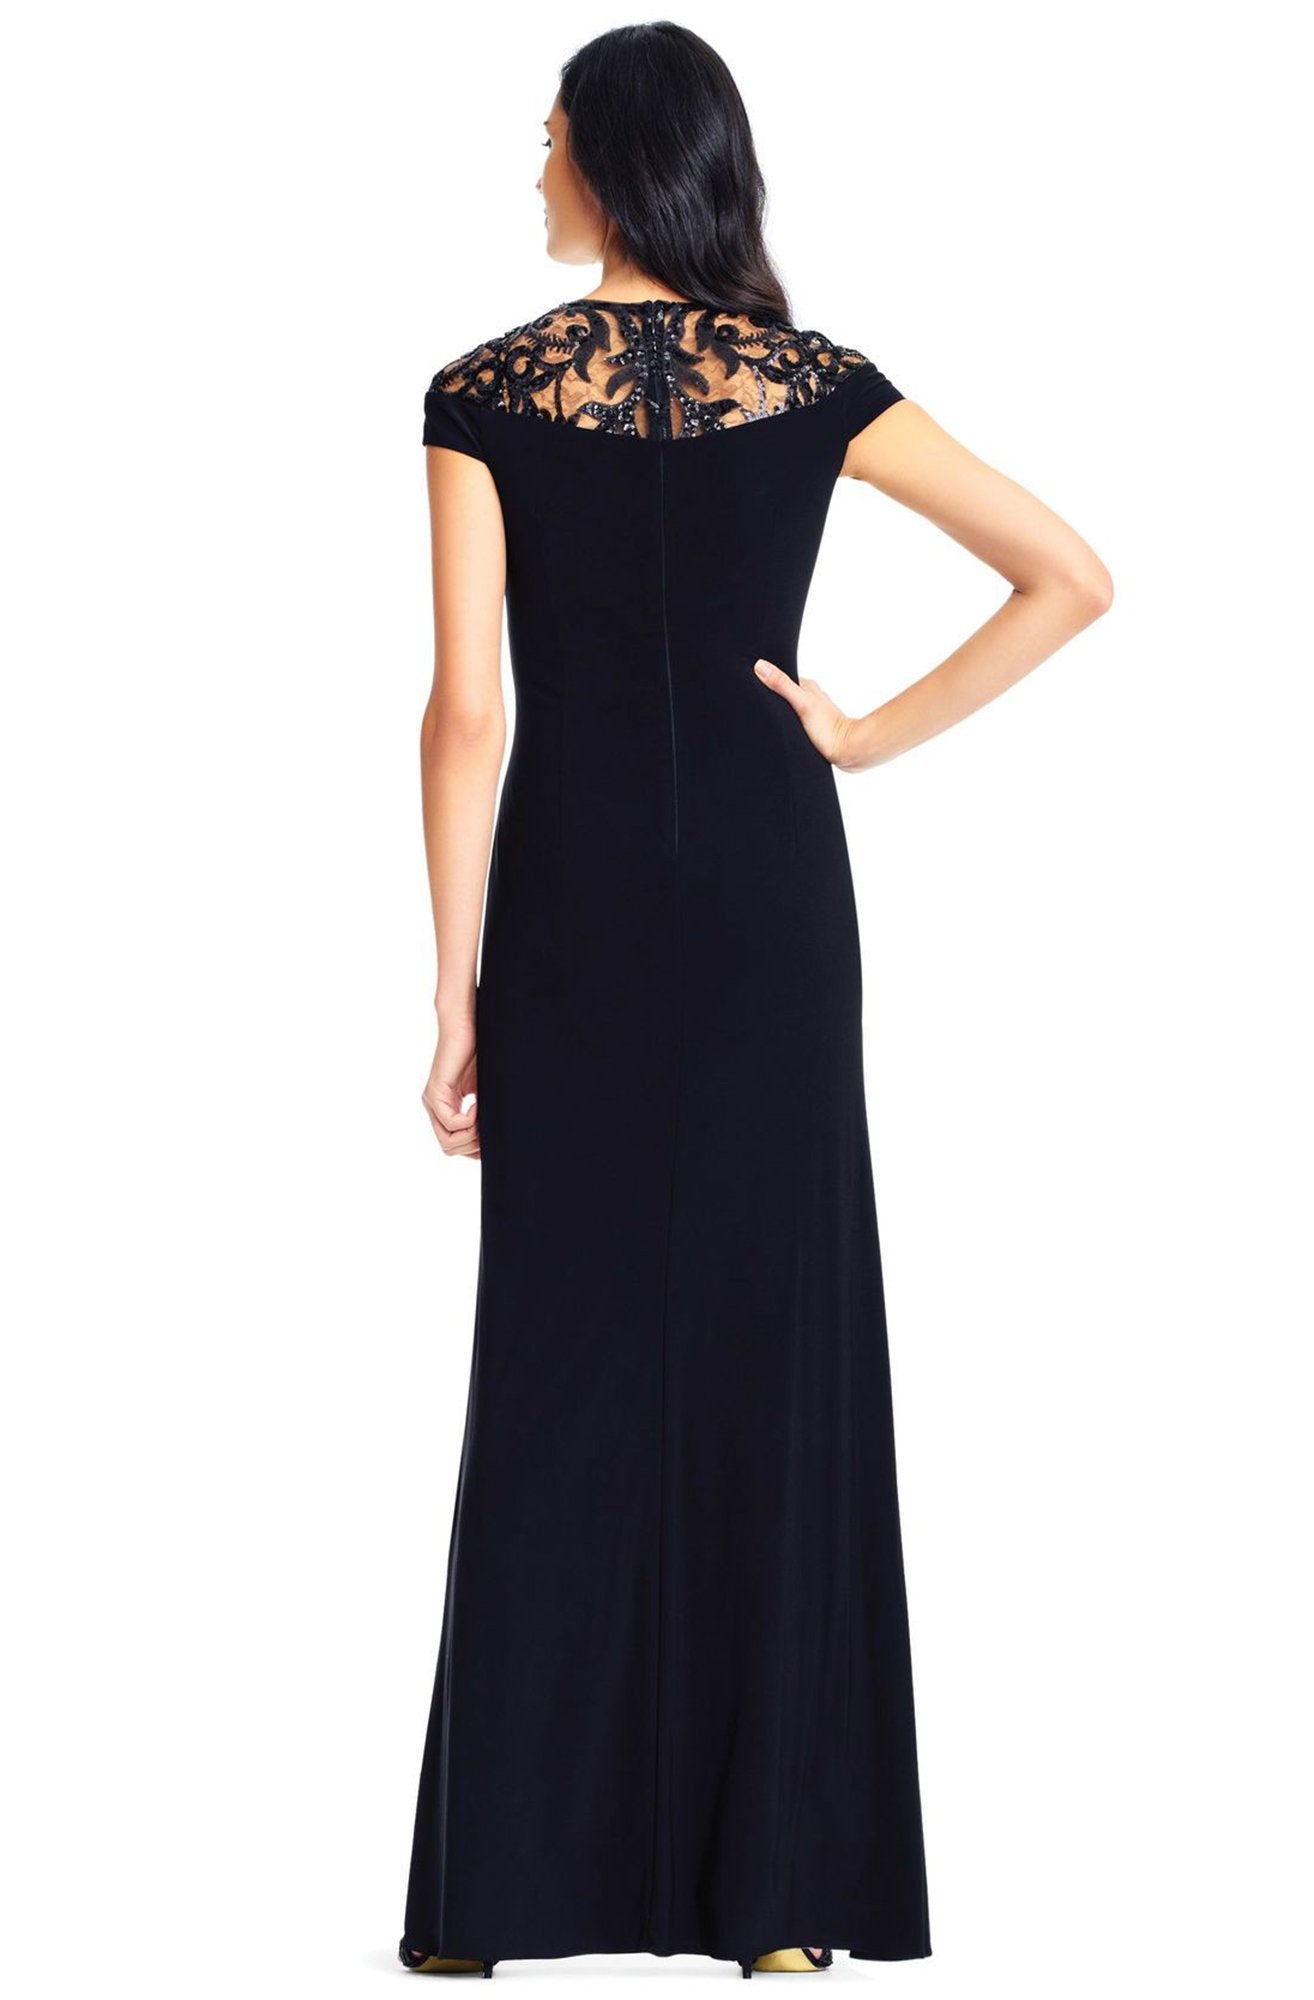 Adrianna Papell - AP1E202740 Sequined Jewel Neck Sheath Dress In Black